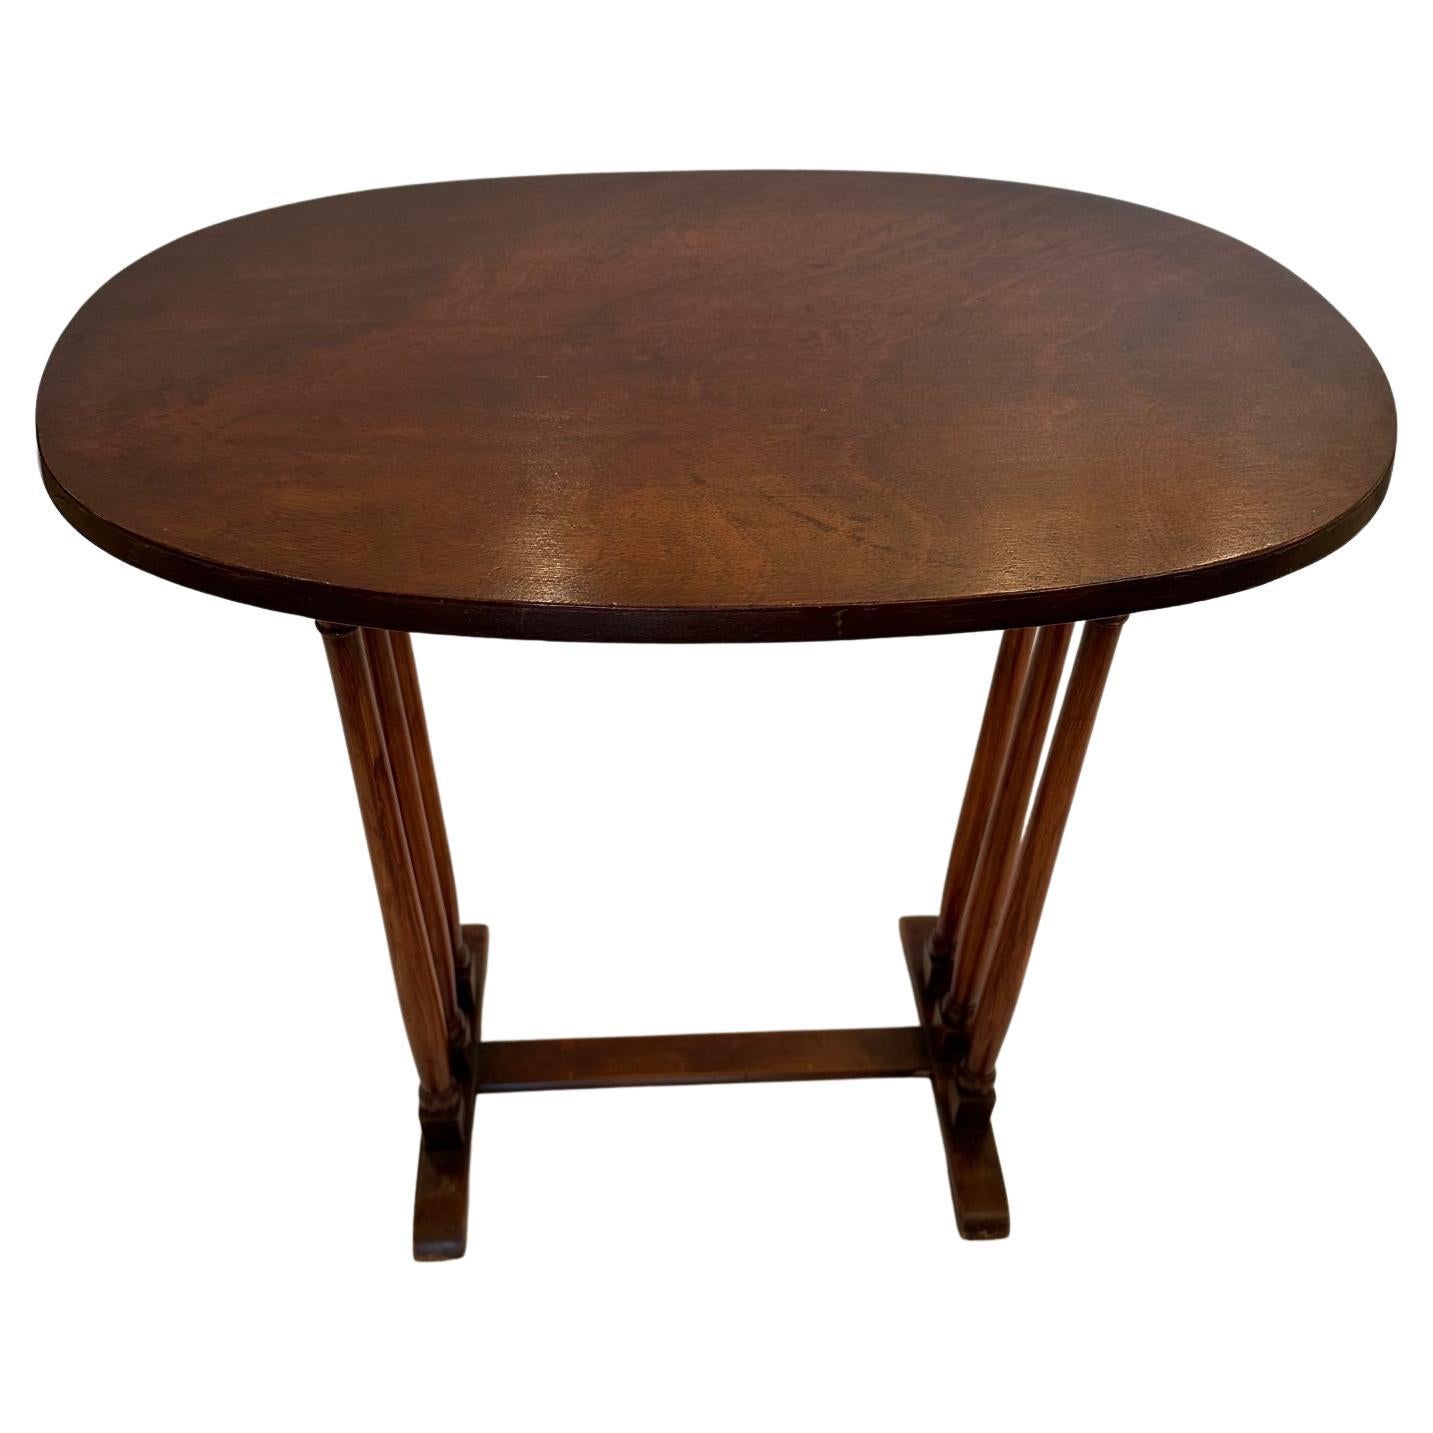 Darling Small Elegant Antique Oval Mahogany Martini End Table For Sale